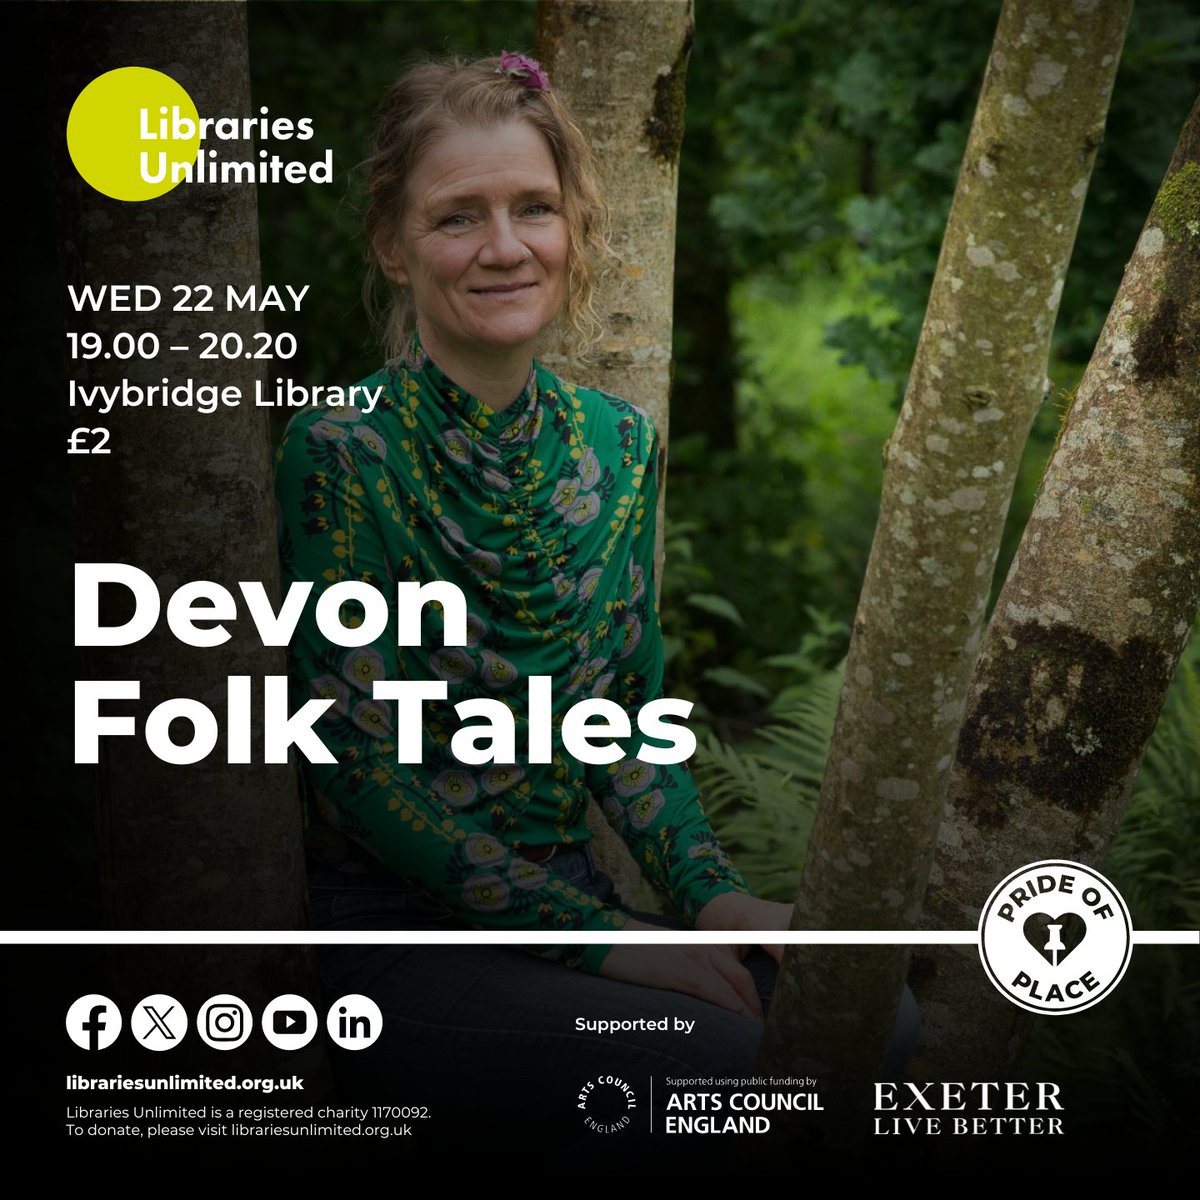 On Tues 7th May @AxLibrary and Wed 22nd May @ivybridgelib hear stories and folktales from Devon, Dartmoor and Exmoor reimagined and retold. Travel Devonshire through time and landscape, get whisked away to the high moor or plunged into the swirling sea! #PrideOfPlace #ACEFunded